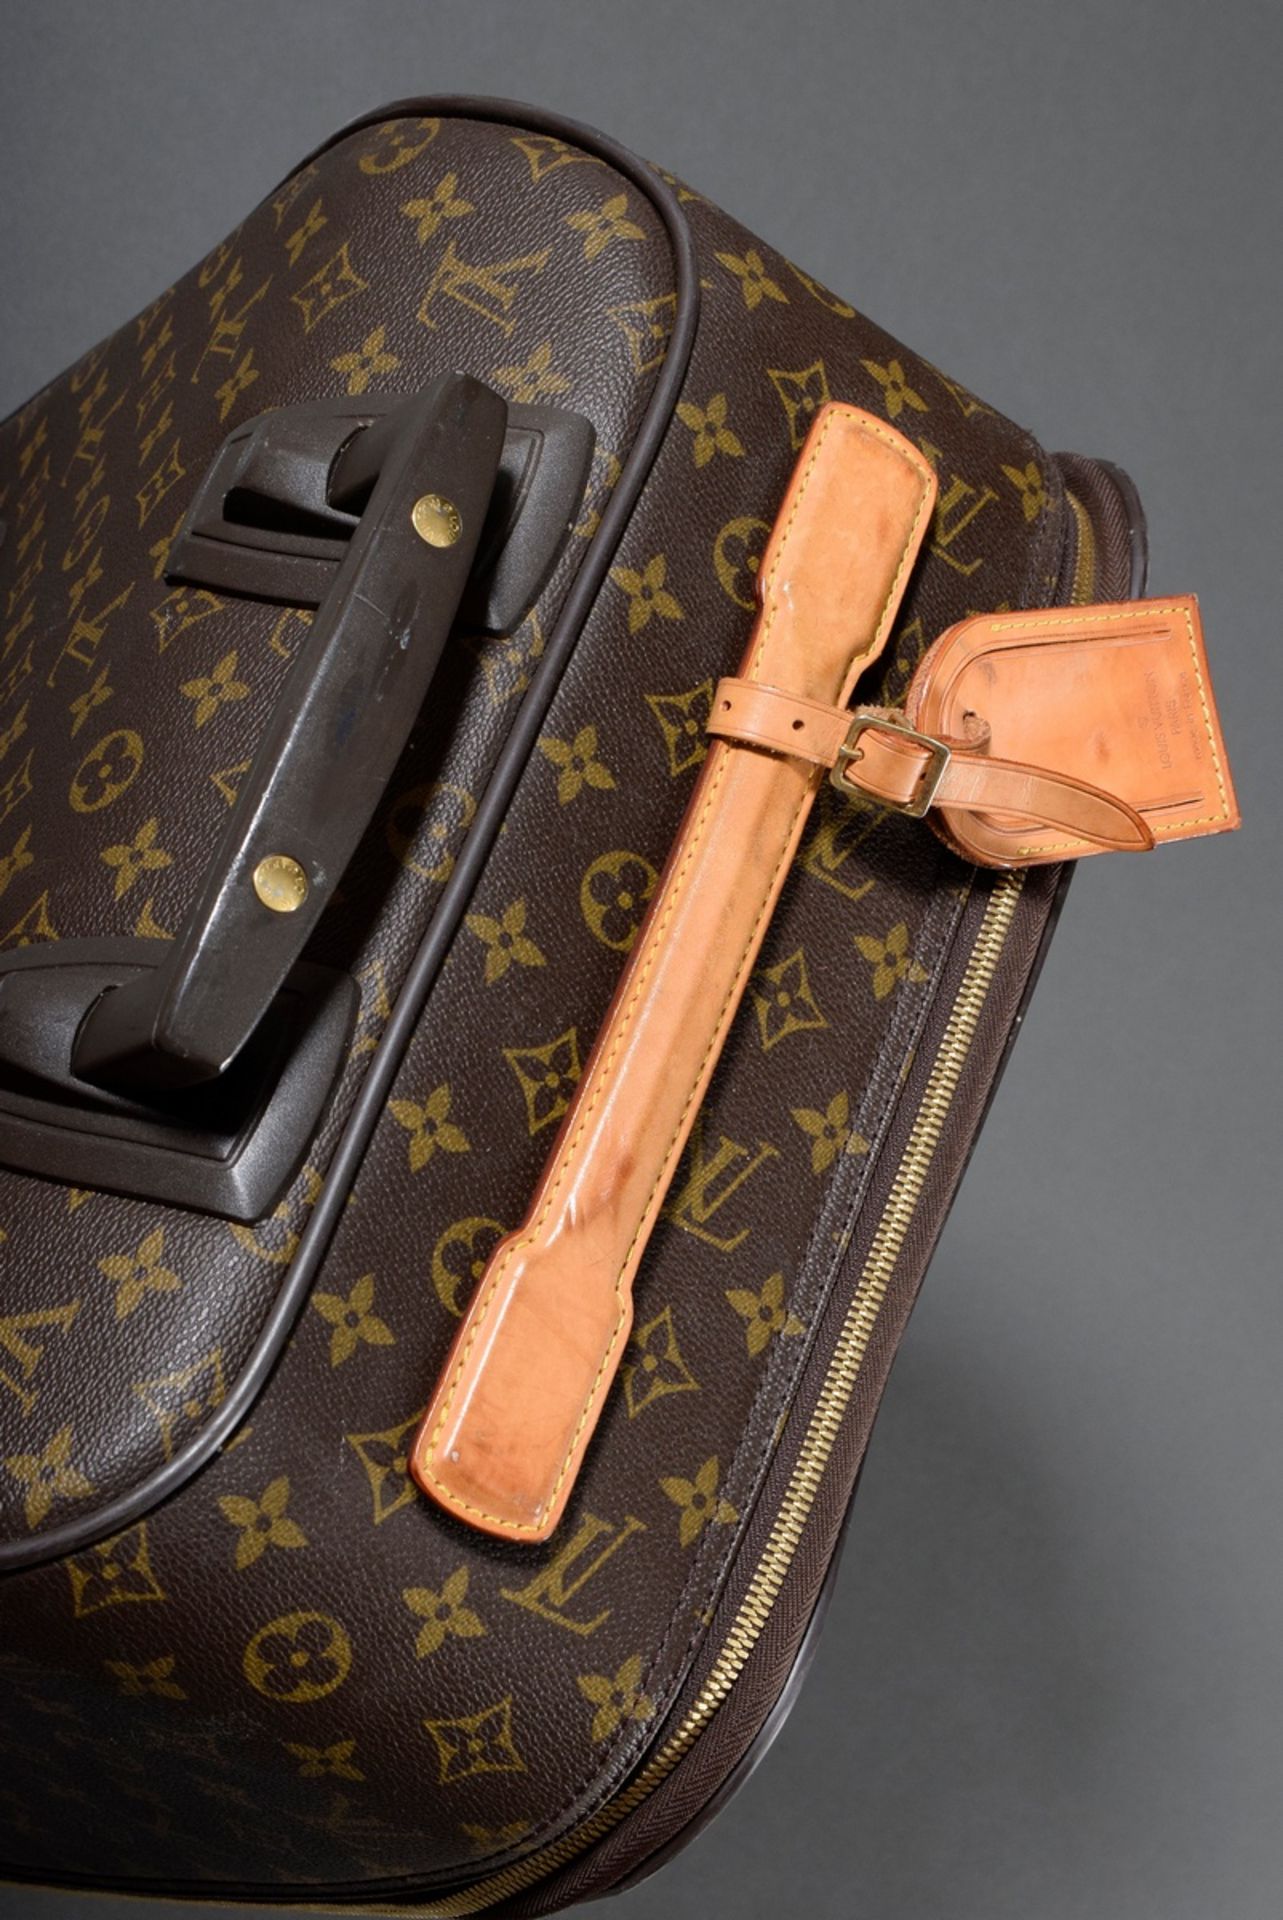 Louis Vuitton "Pégase 50" in "Monogram Canvas" with light cowhide details, gold-coloured hardware,  - Image 3 of 6